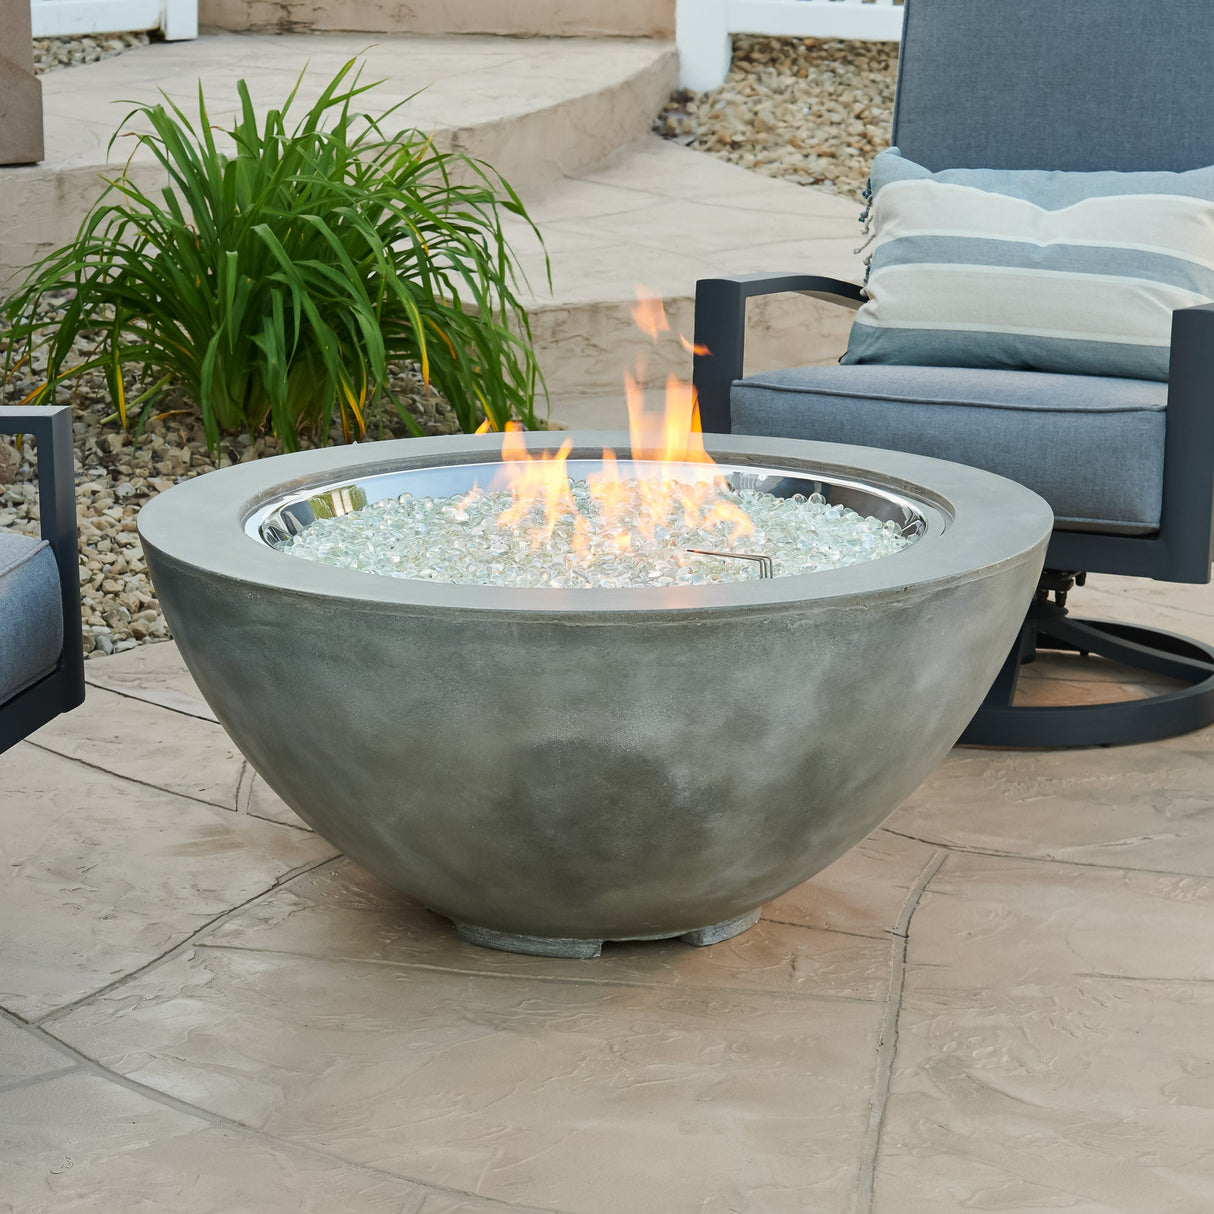 A Natural Grey Cove Round Gas Fire Pit Bowl 42" with a large flame coming from the burner